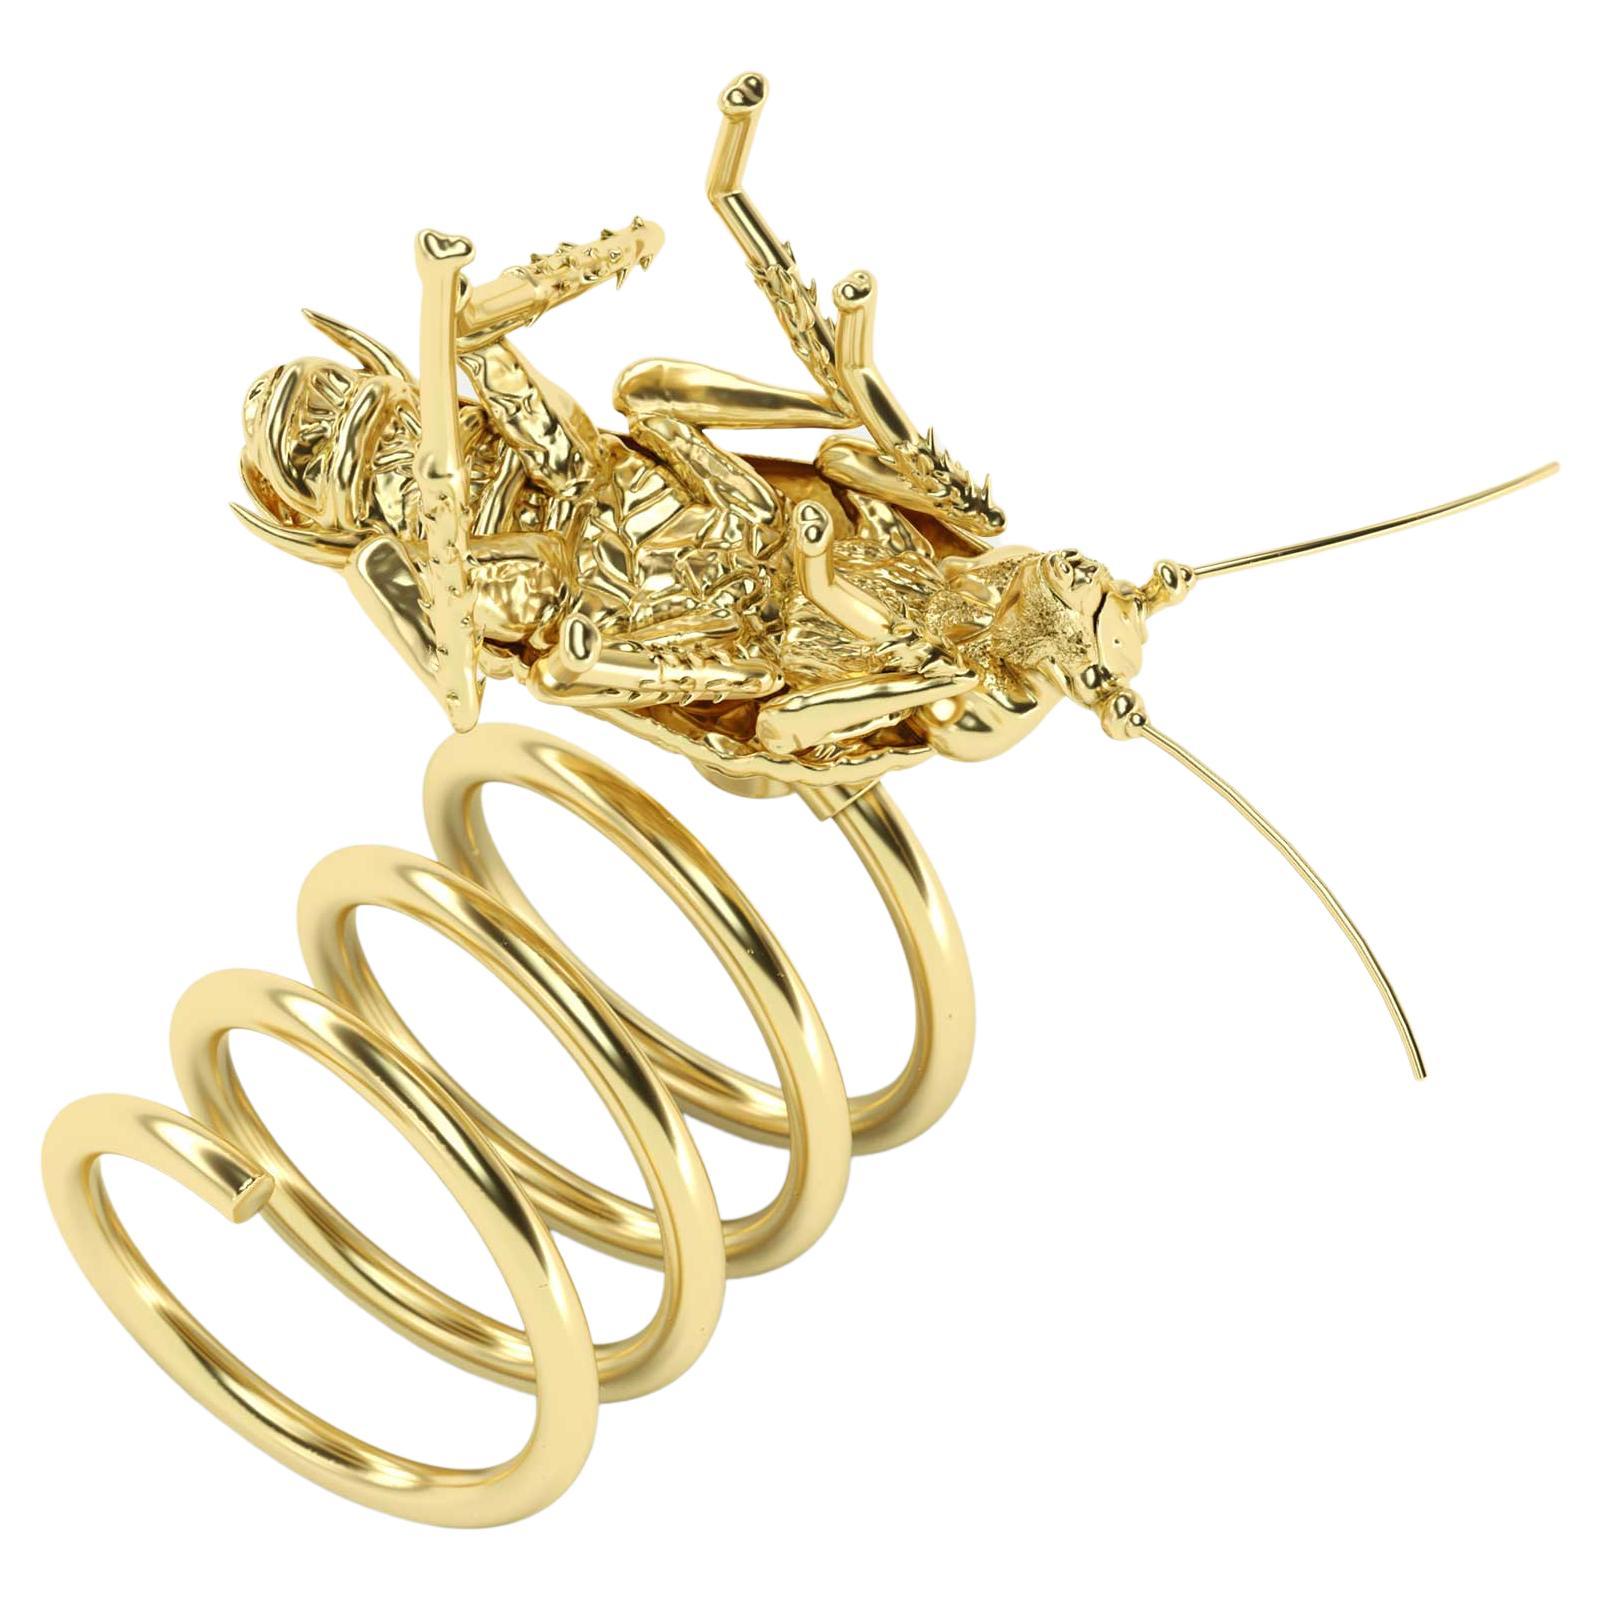 Golden cocktail ring with realistic nature, 18k Yellow Gold